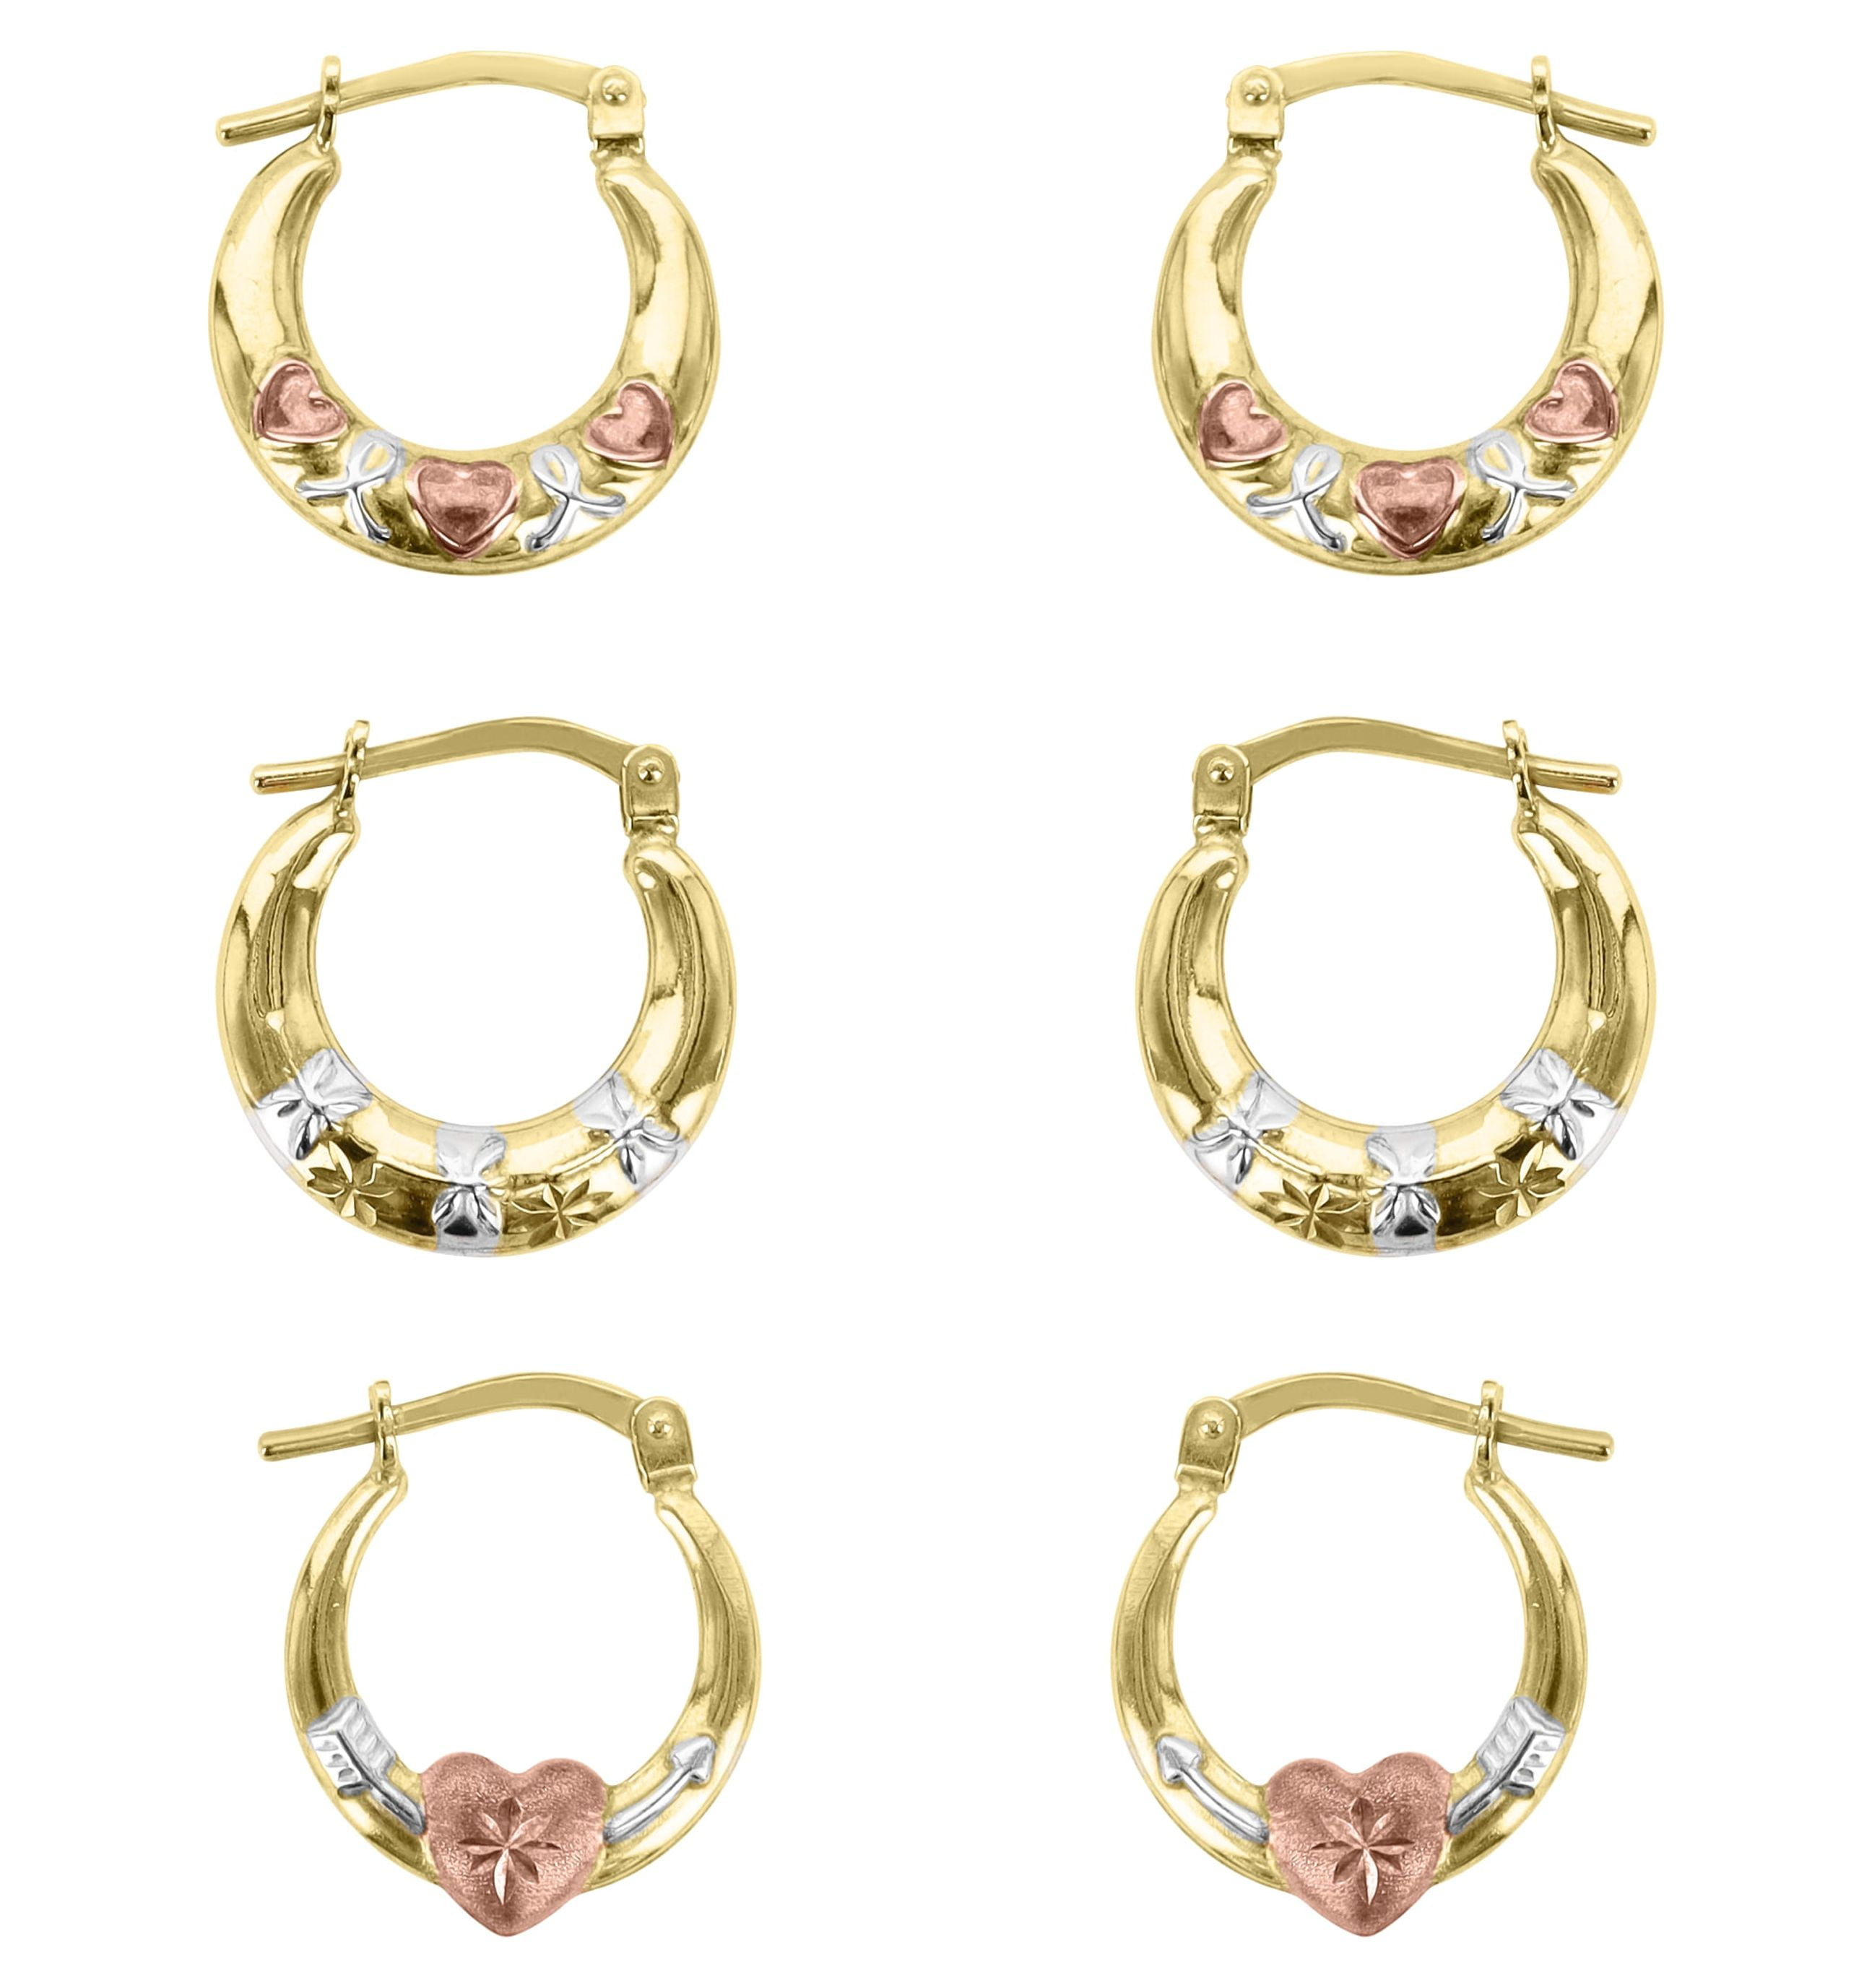 Luxury Gold Hoop Earrings Set Forth For Women And Girls Designer Jewelry  For Valentines Day From Designer_sunglass123, $12.55